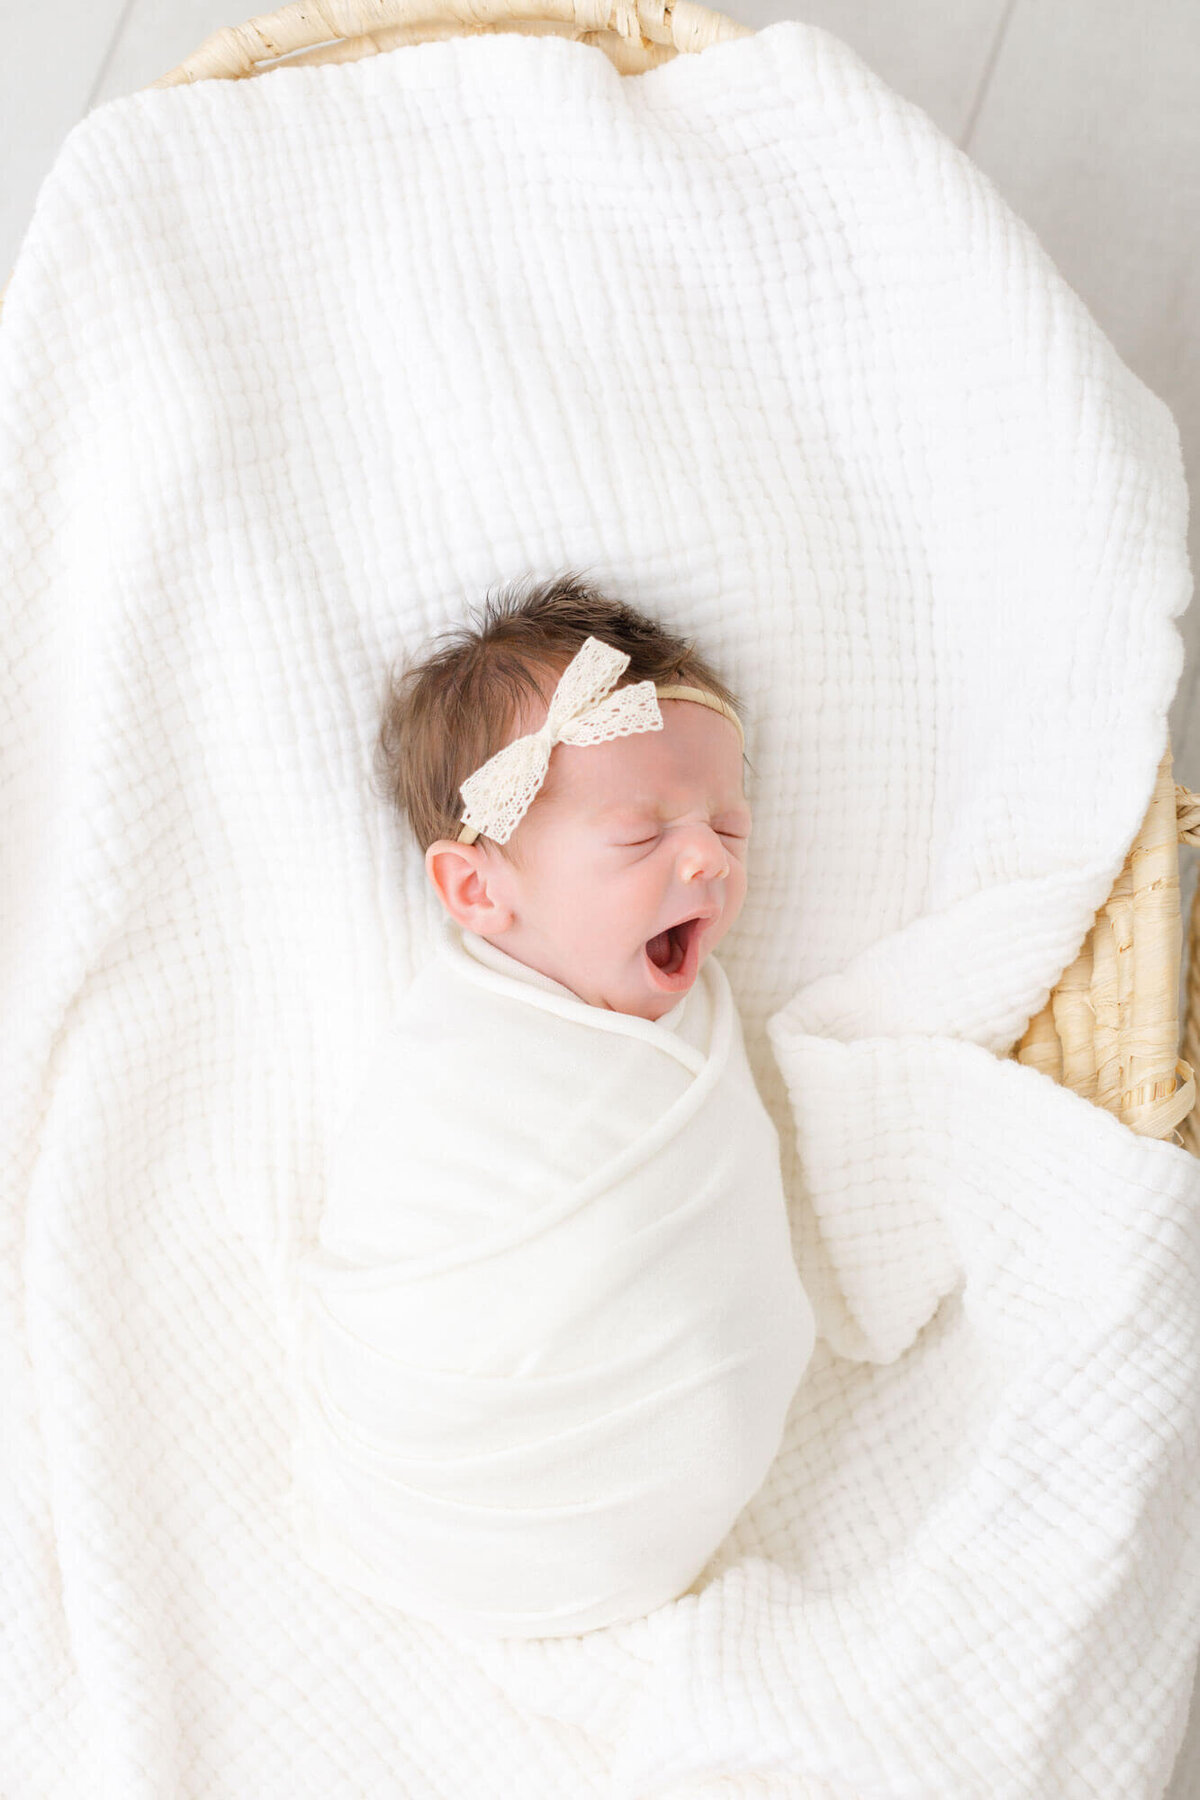 Baby swaddled in white and laying on a white blanket in a Moses basket. She is wearing a cream lace headband and yawning wildly.